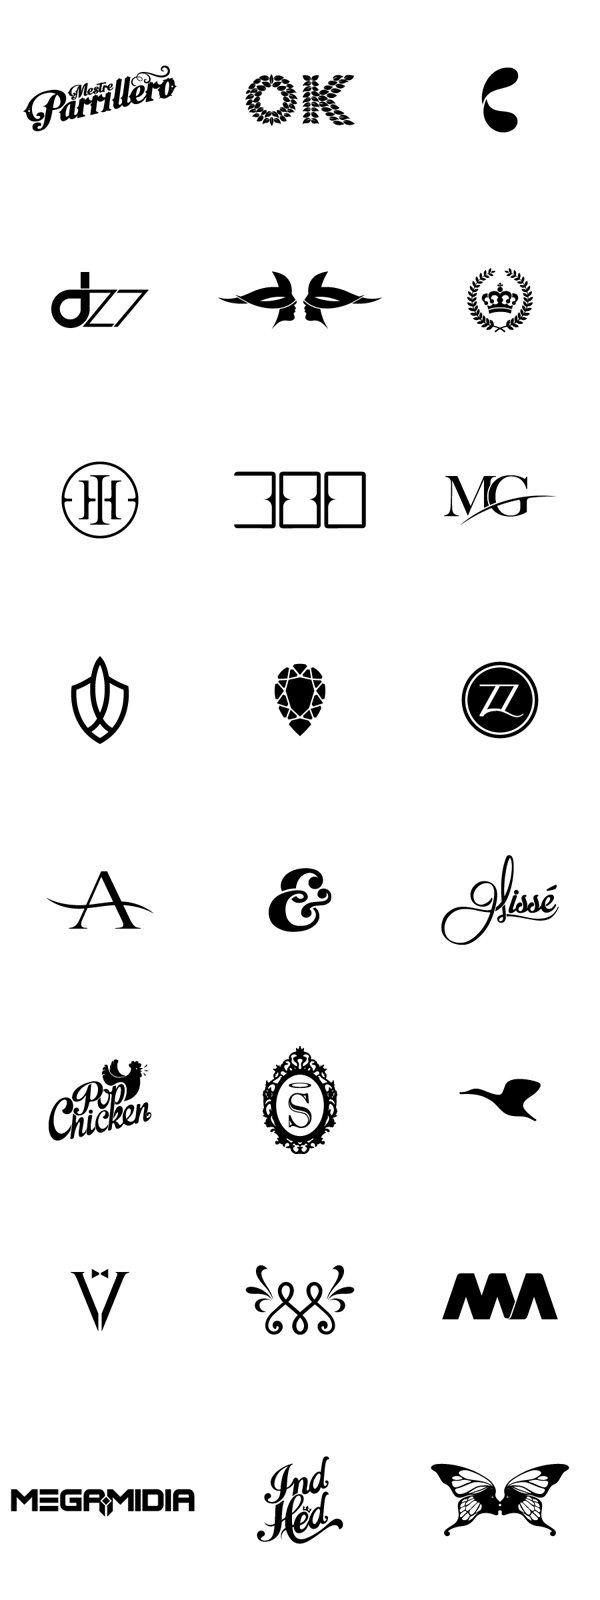 Collection of custom letterings and logos created by IndustriaHED™ Branding Co.